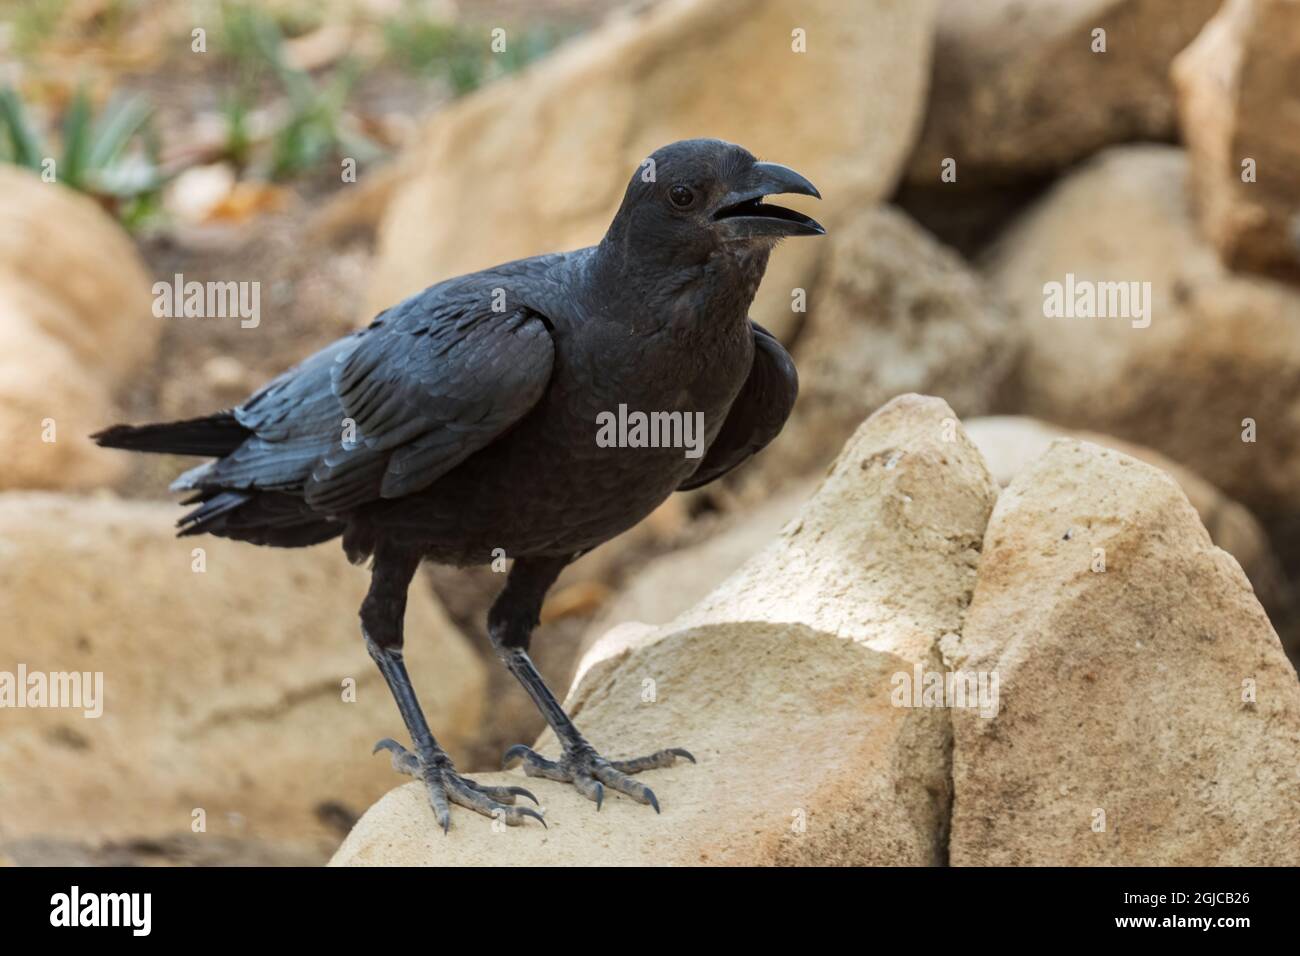 Fan-tailed Raven - Corvus rhipidurus, large black passerine bird from Horn of Africa woodlands and forests, Ethiopia. Stock Photo